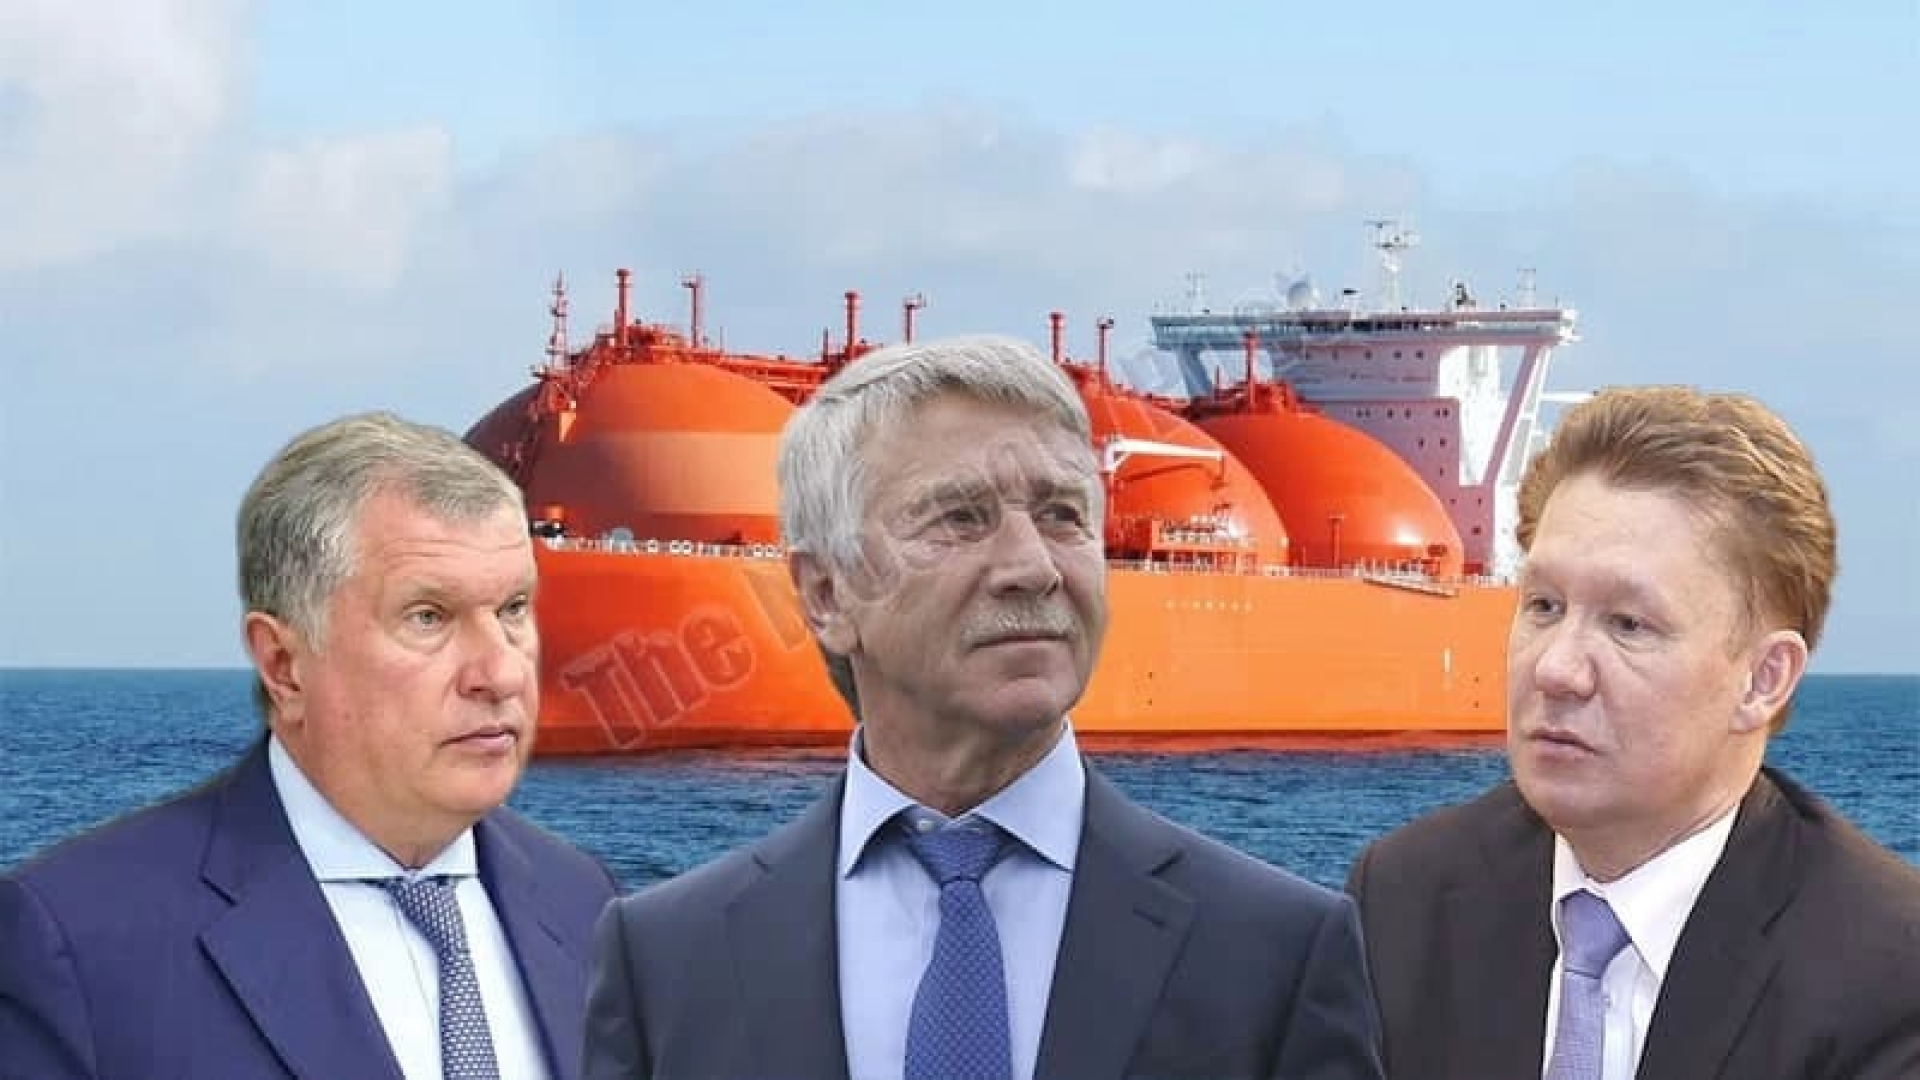 Mikhelson "gases" to Sechin?